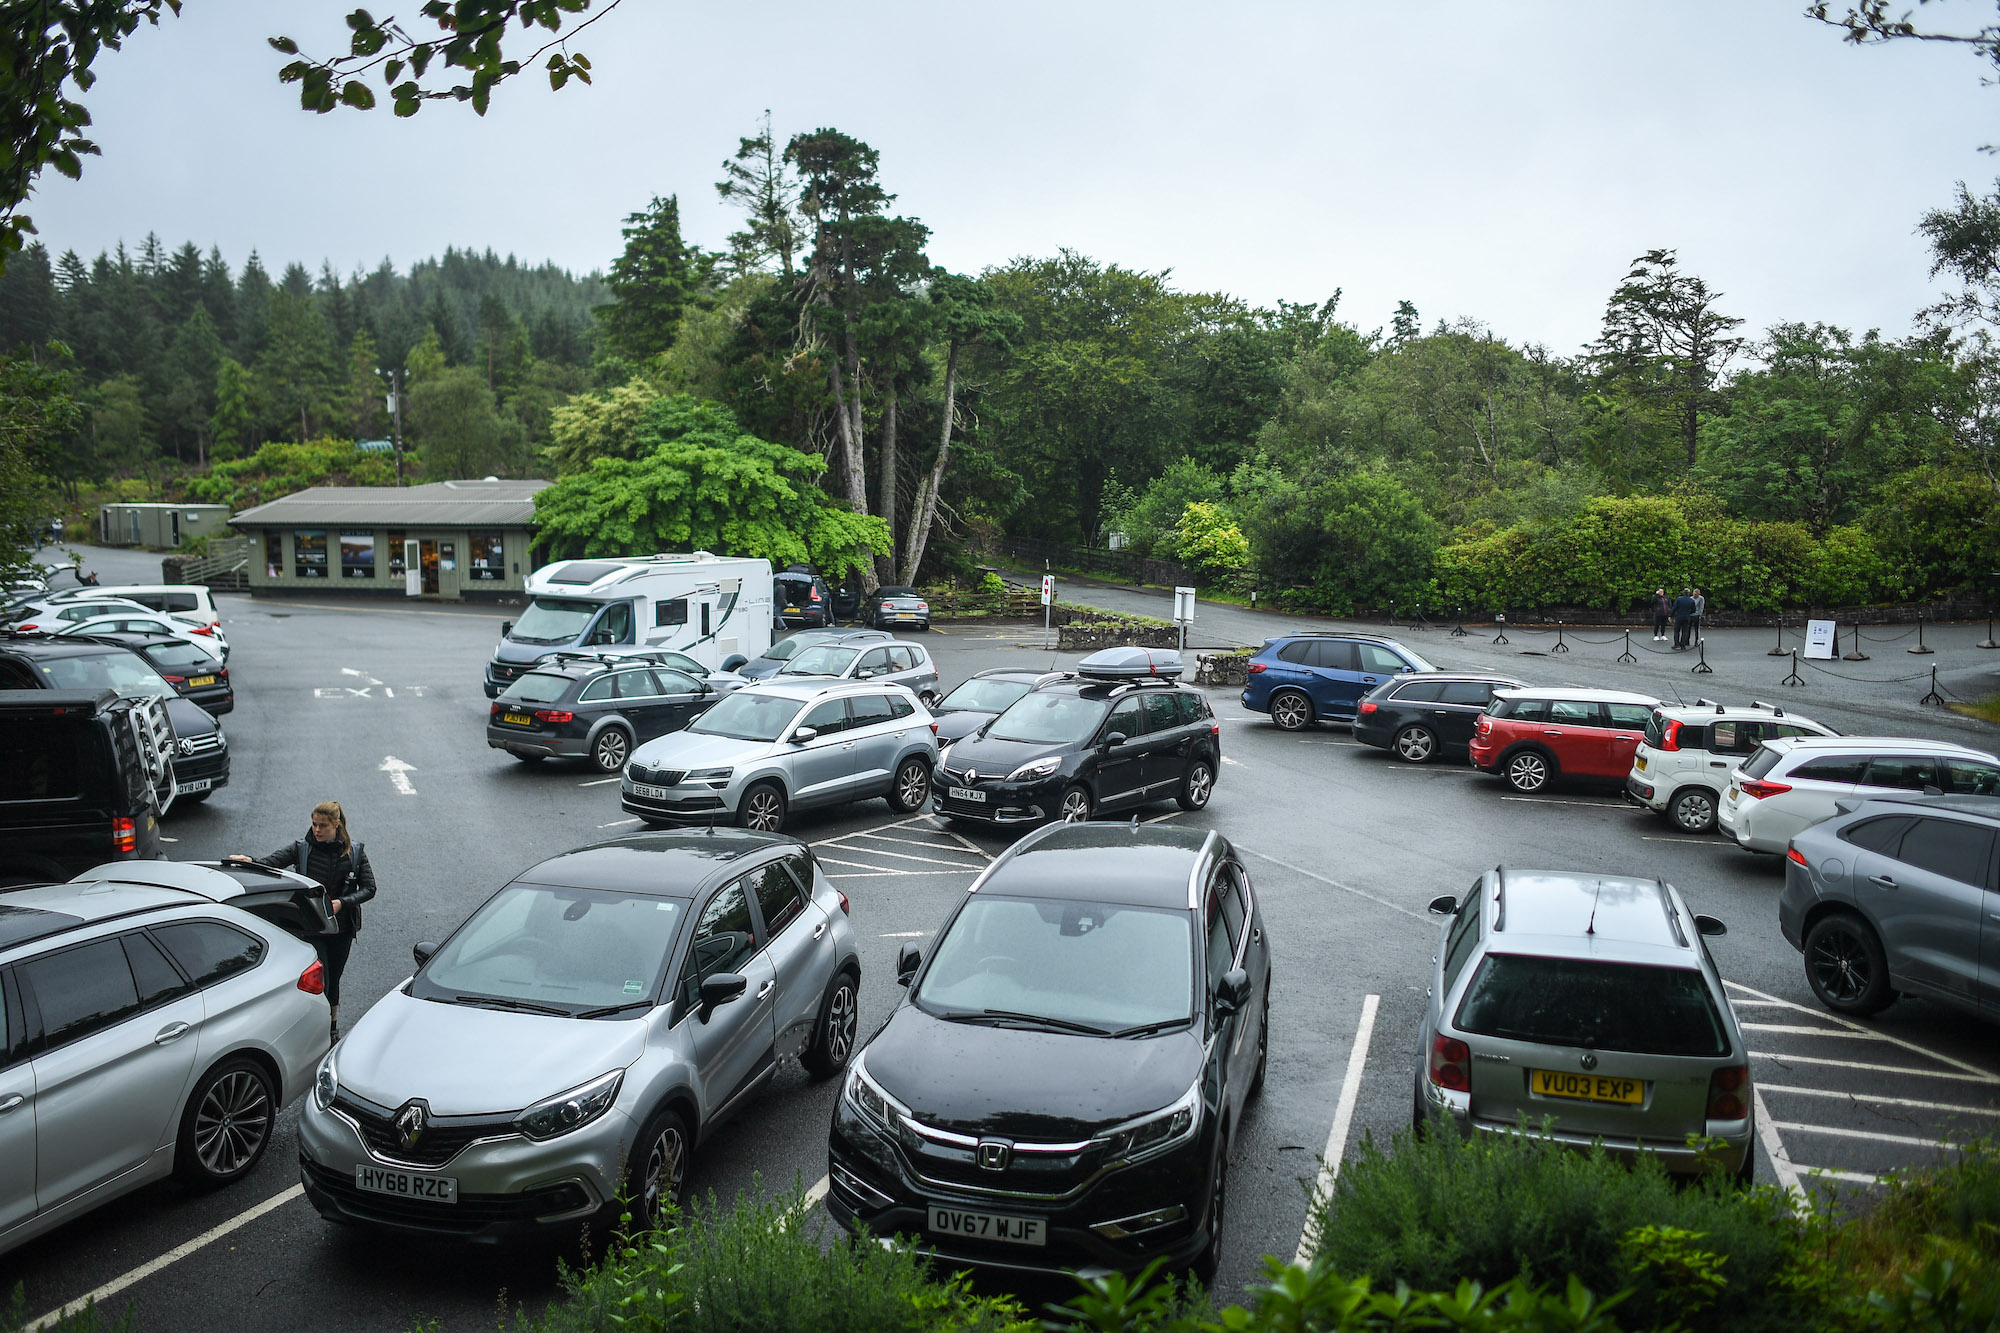 A parking lot with cars, where a potential parking lot accident could have occurred.